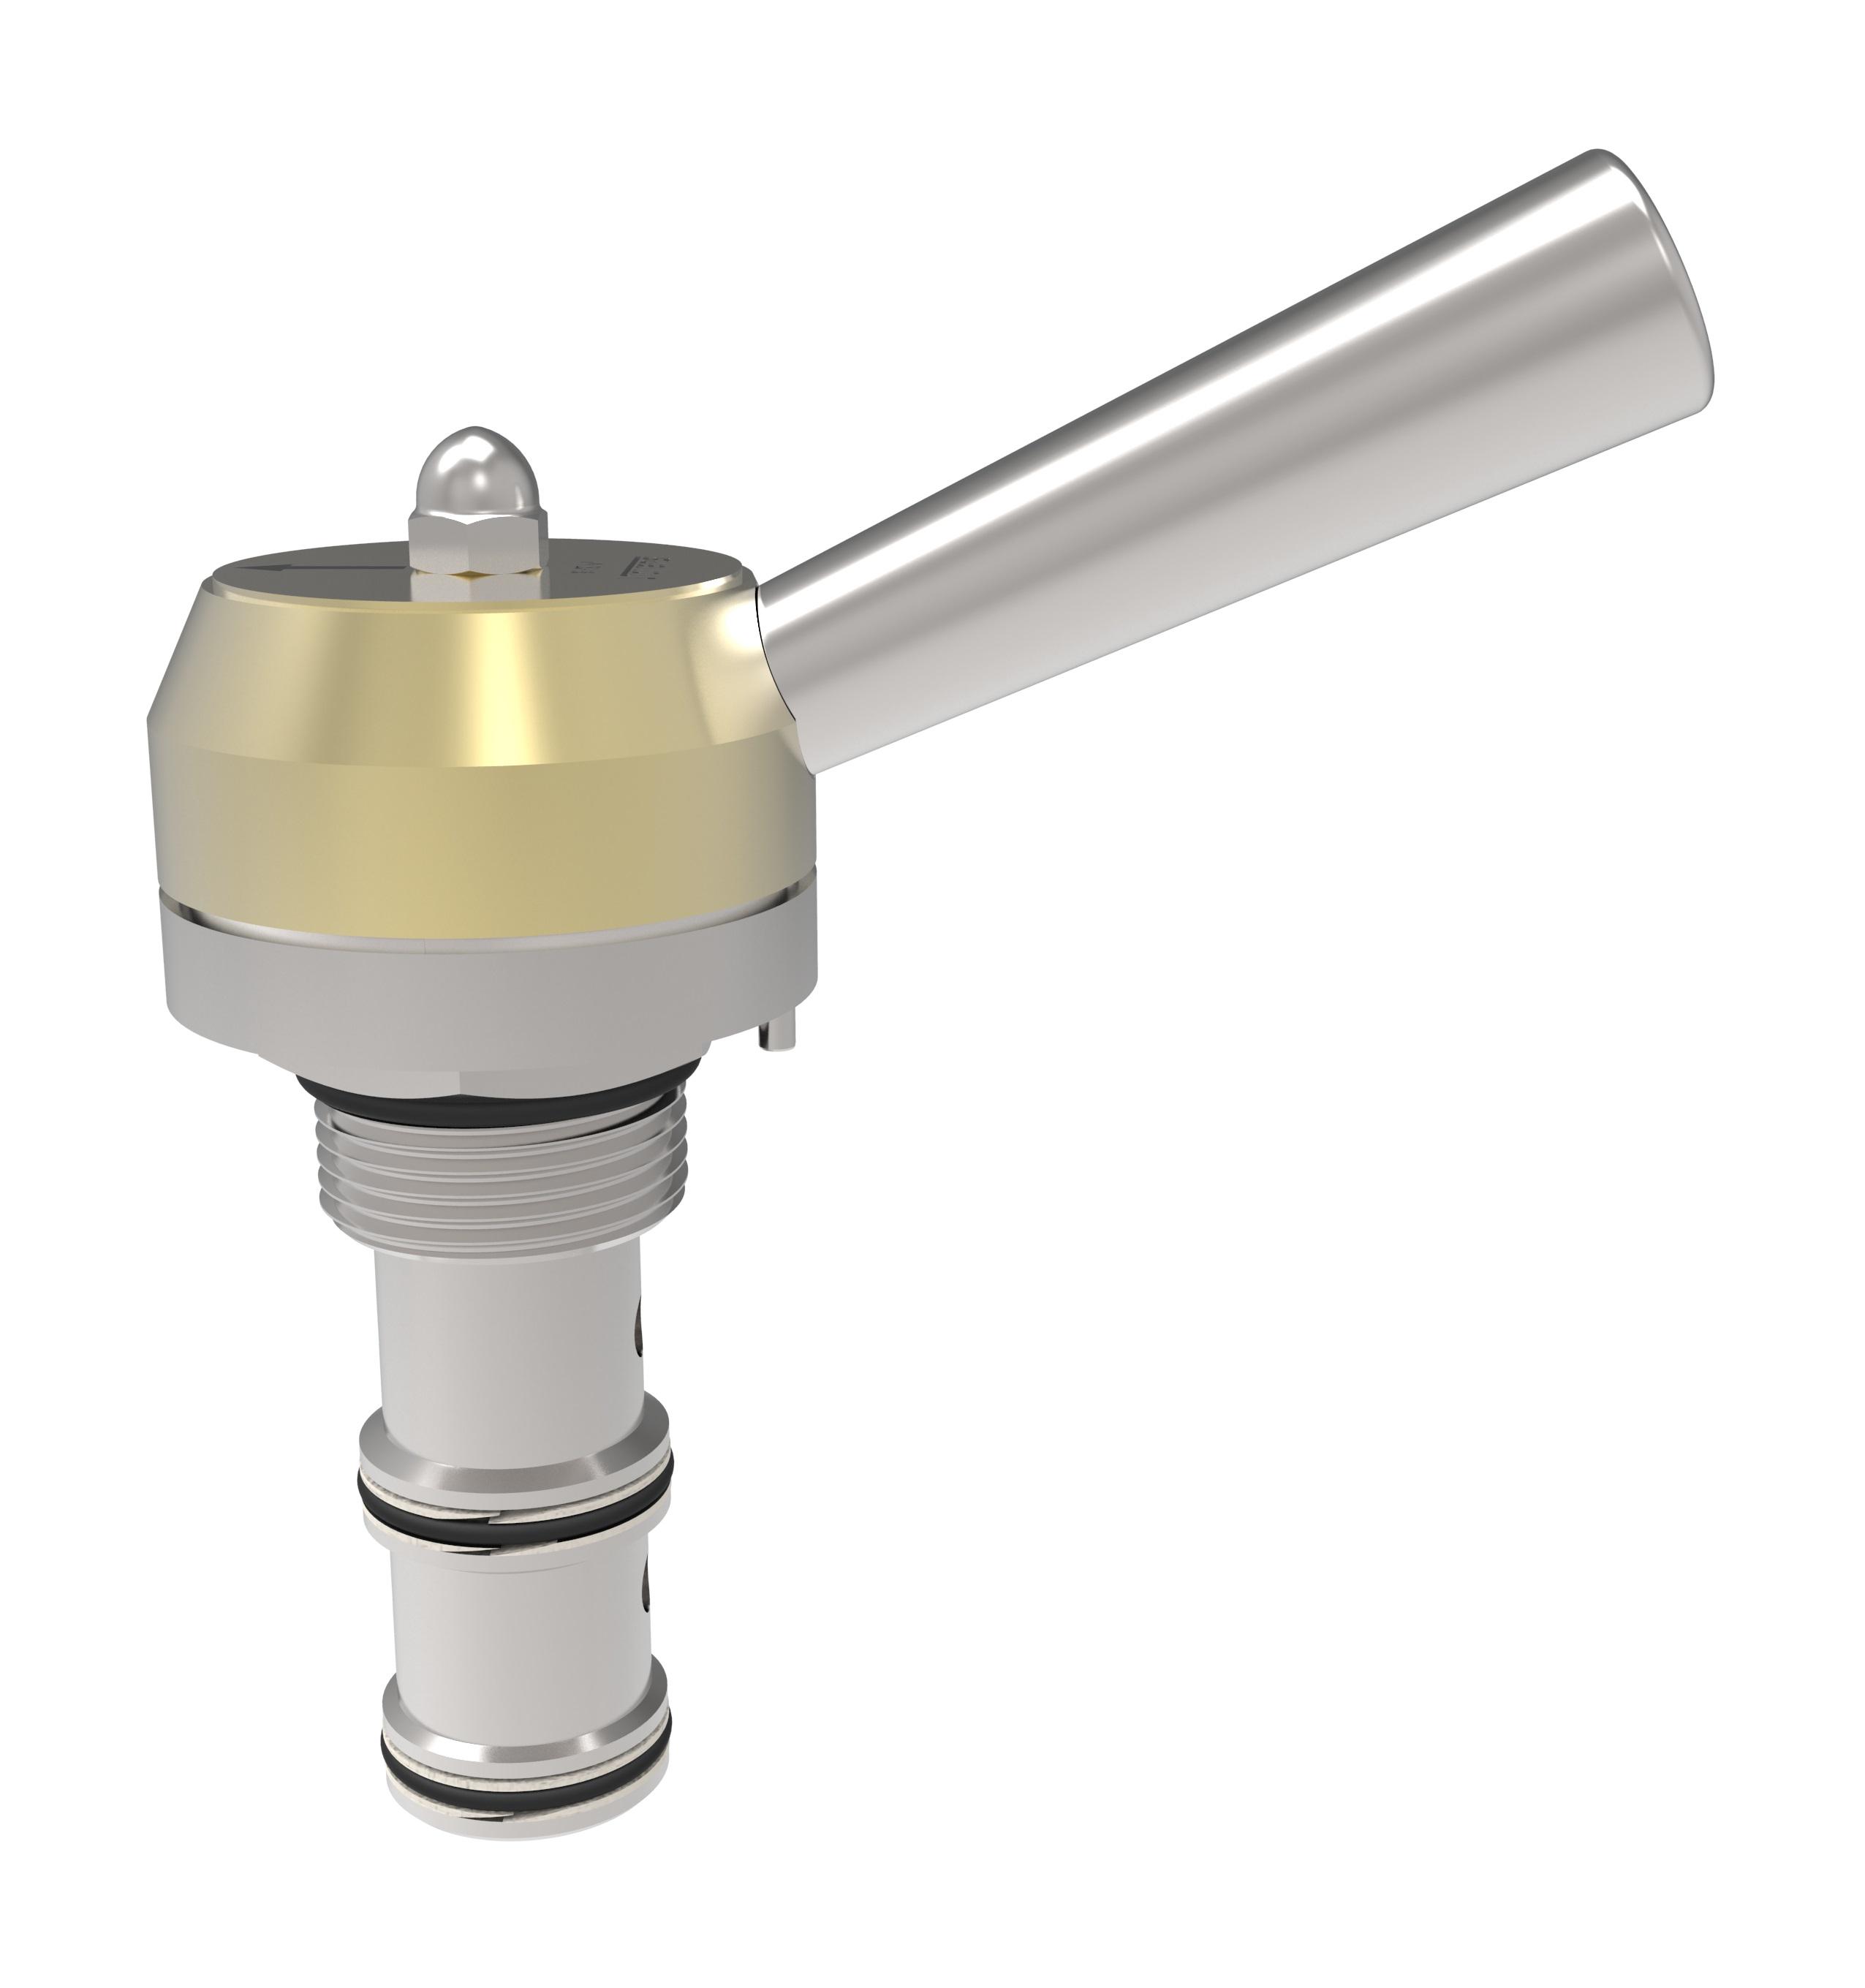 Vickers PTS6-10 Screw-in Pilot to Shift Cartridge Valve